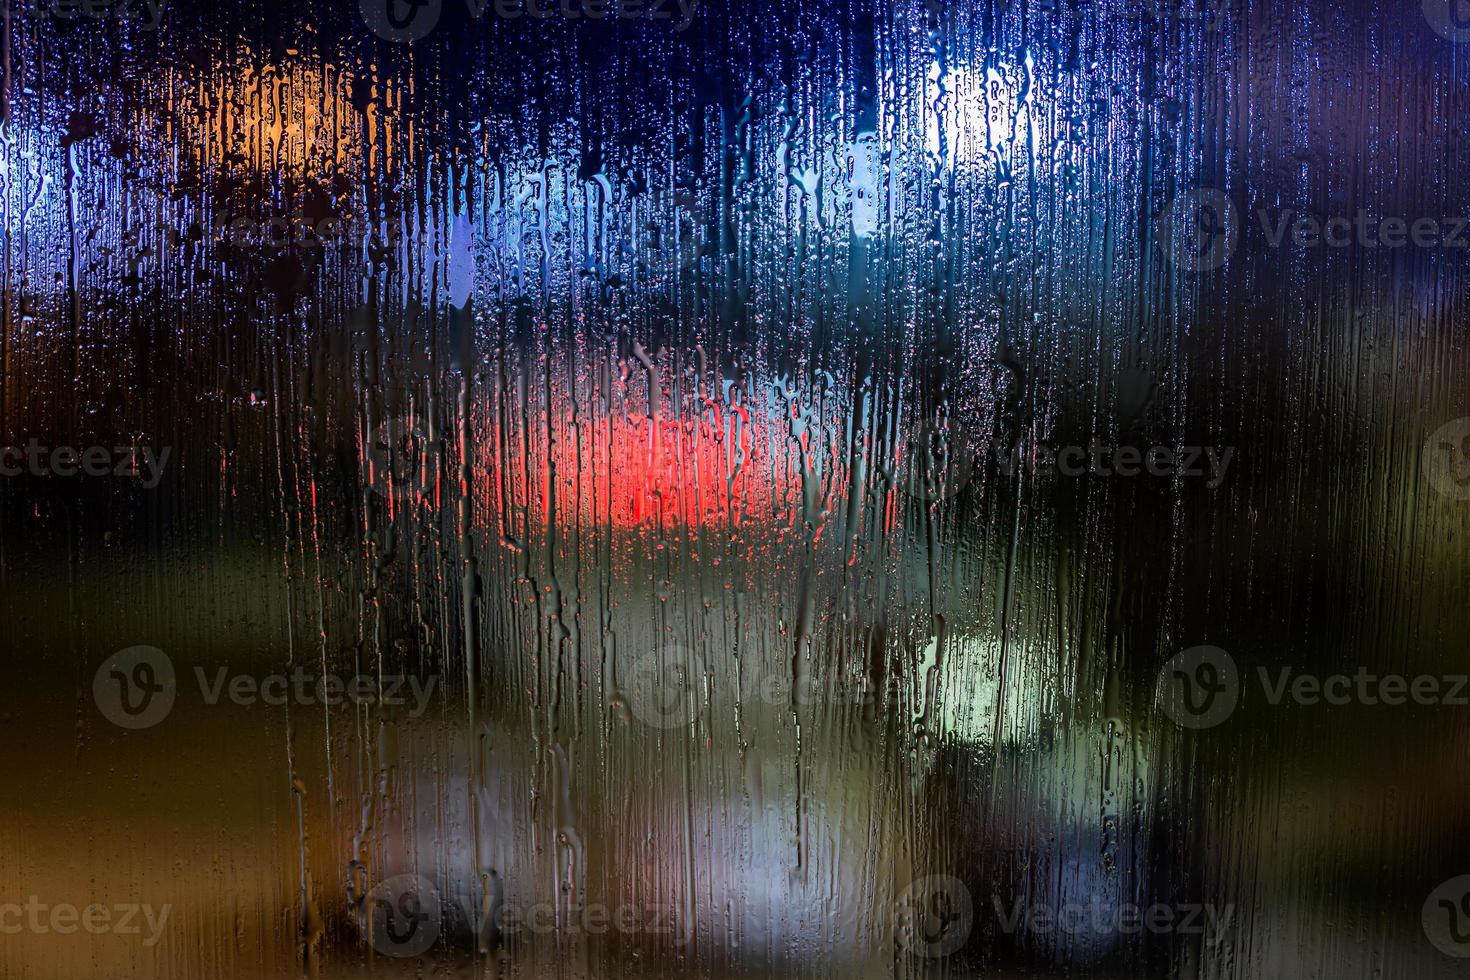 an abstract background night street lights bokeh through wet glass, close-up with selective focus photo